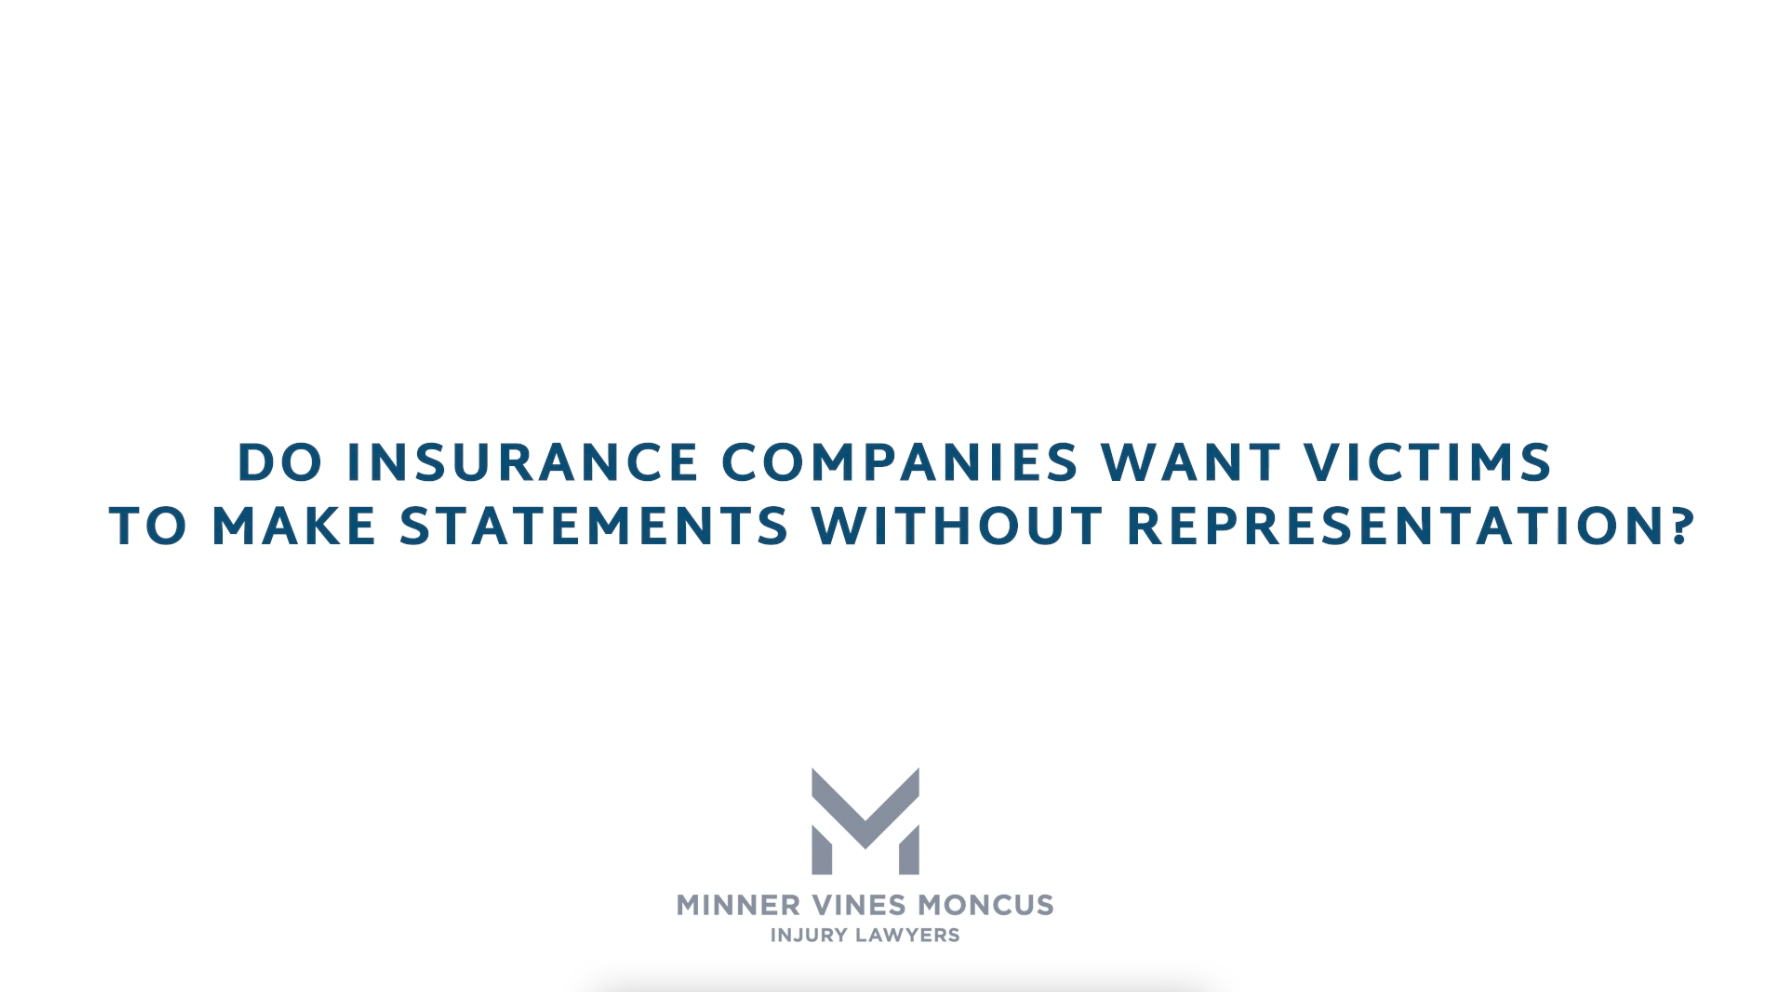 Do insurance companies want victims to make statements without representation?